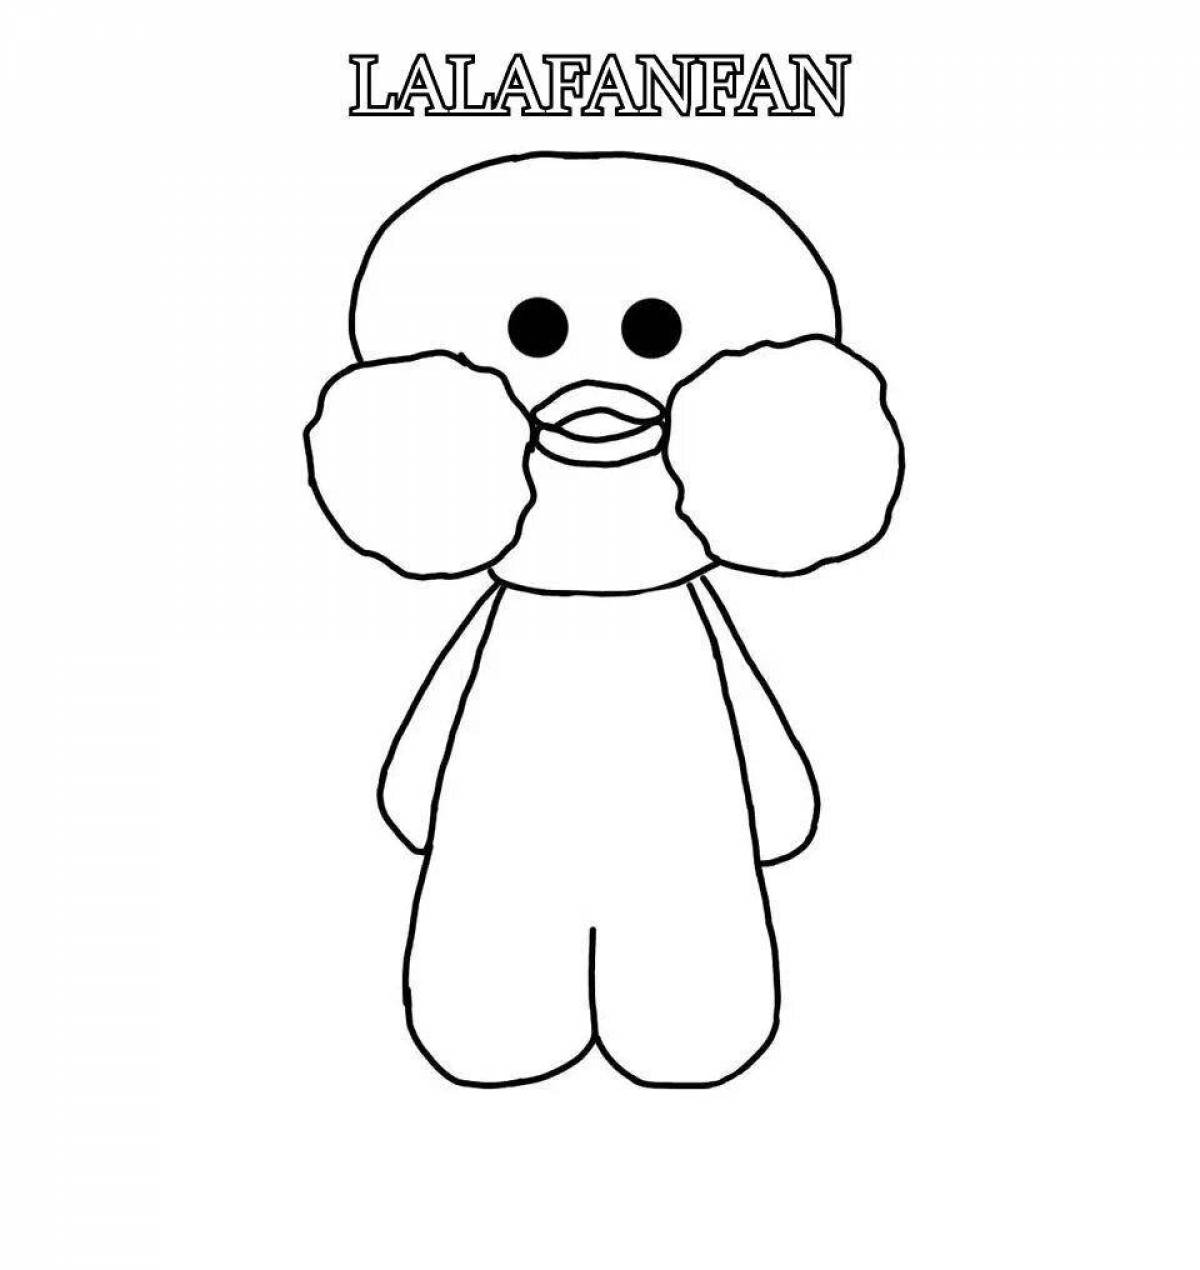 Coloring funny duck - lalafanfan